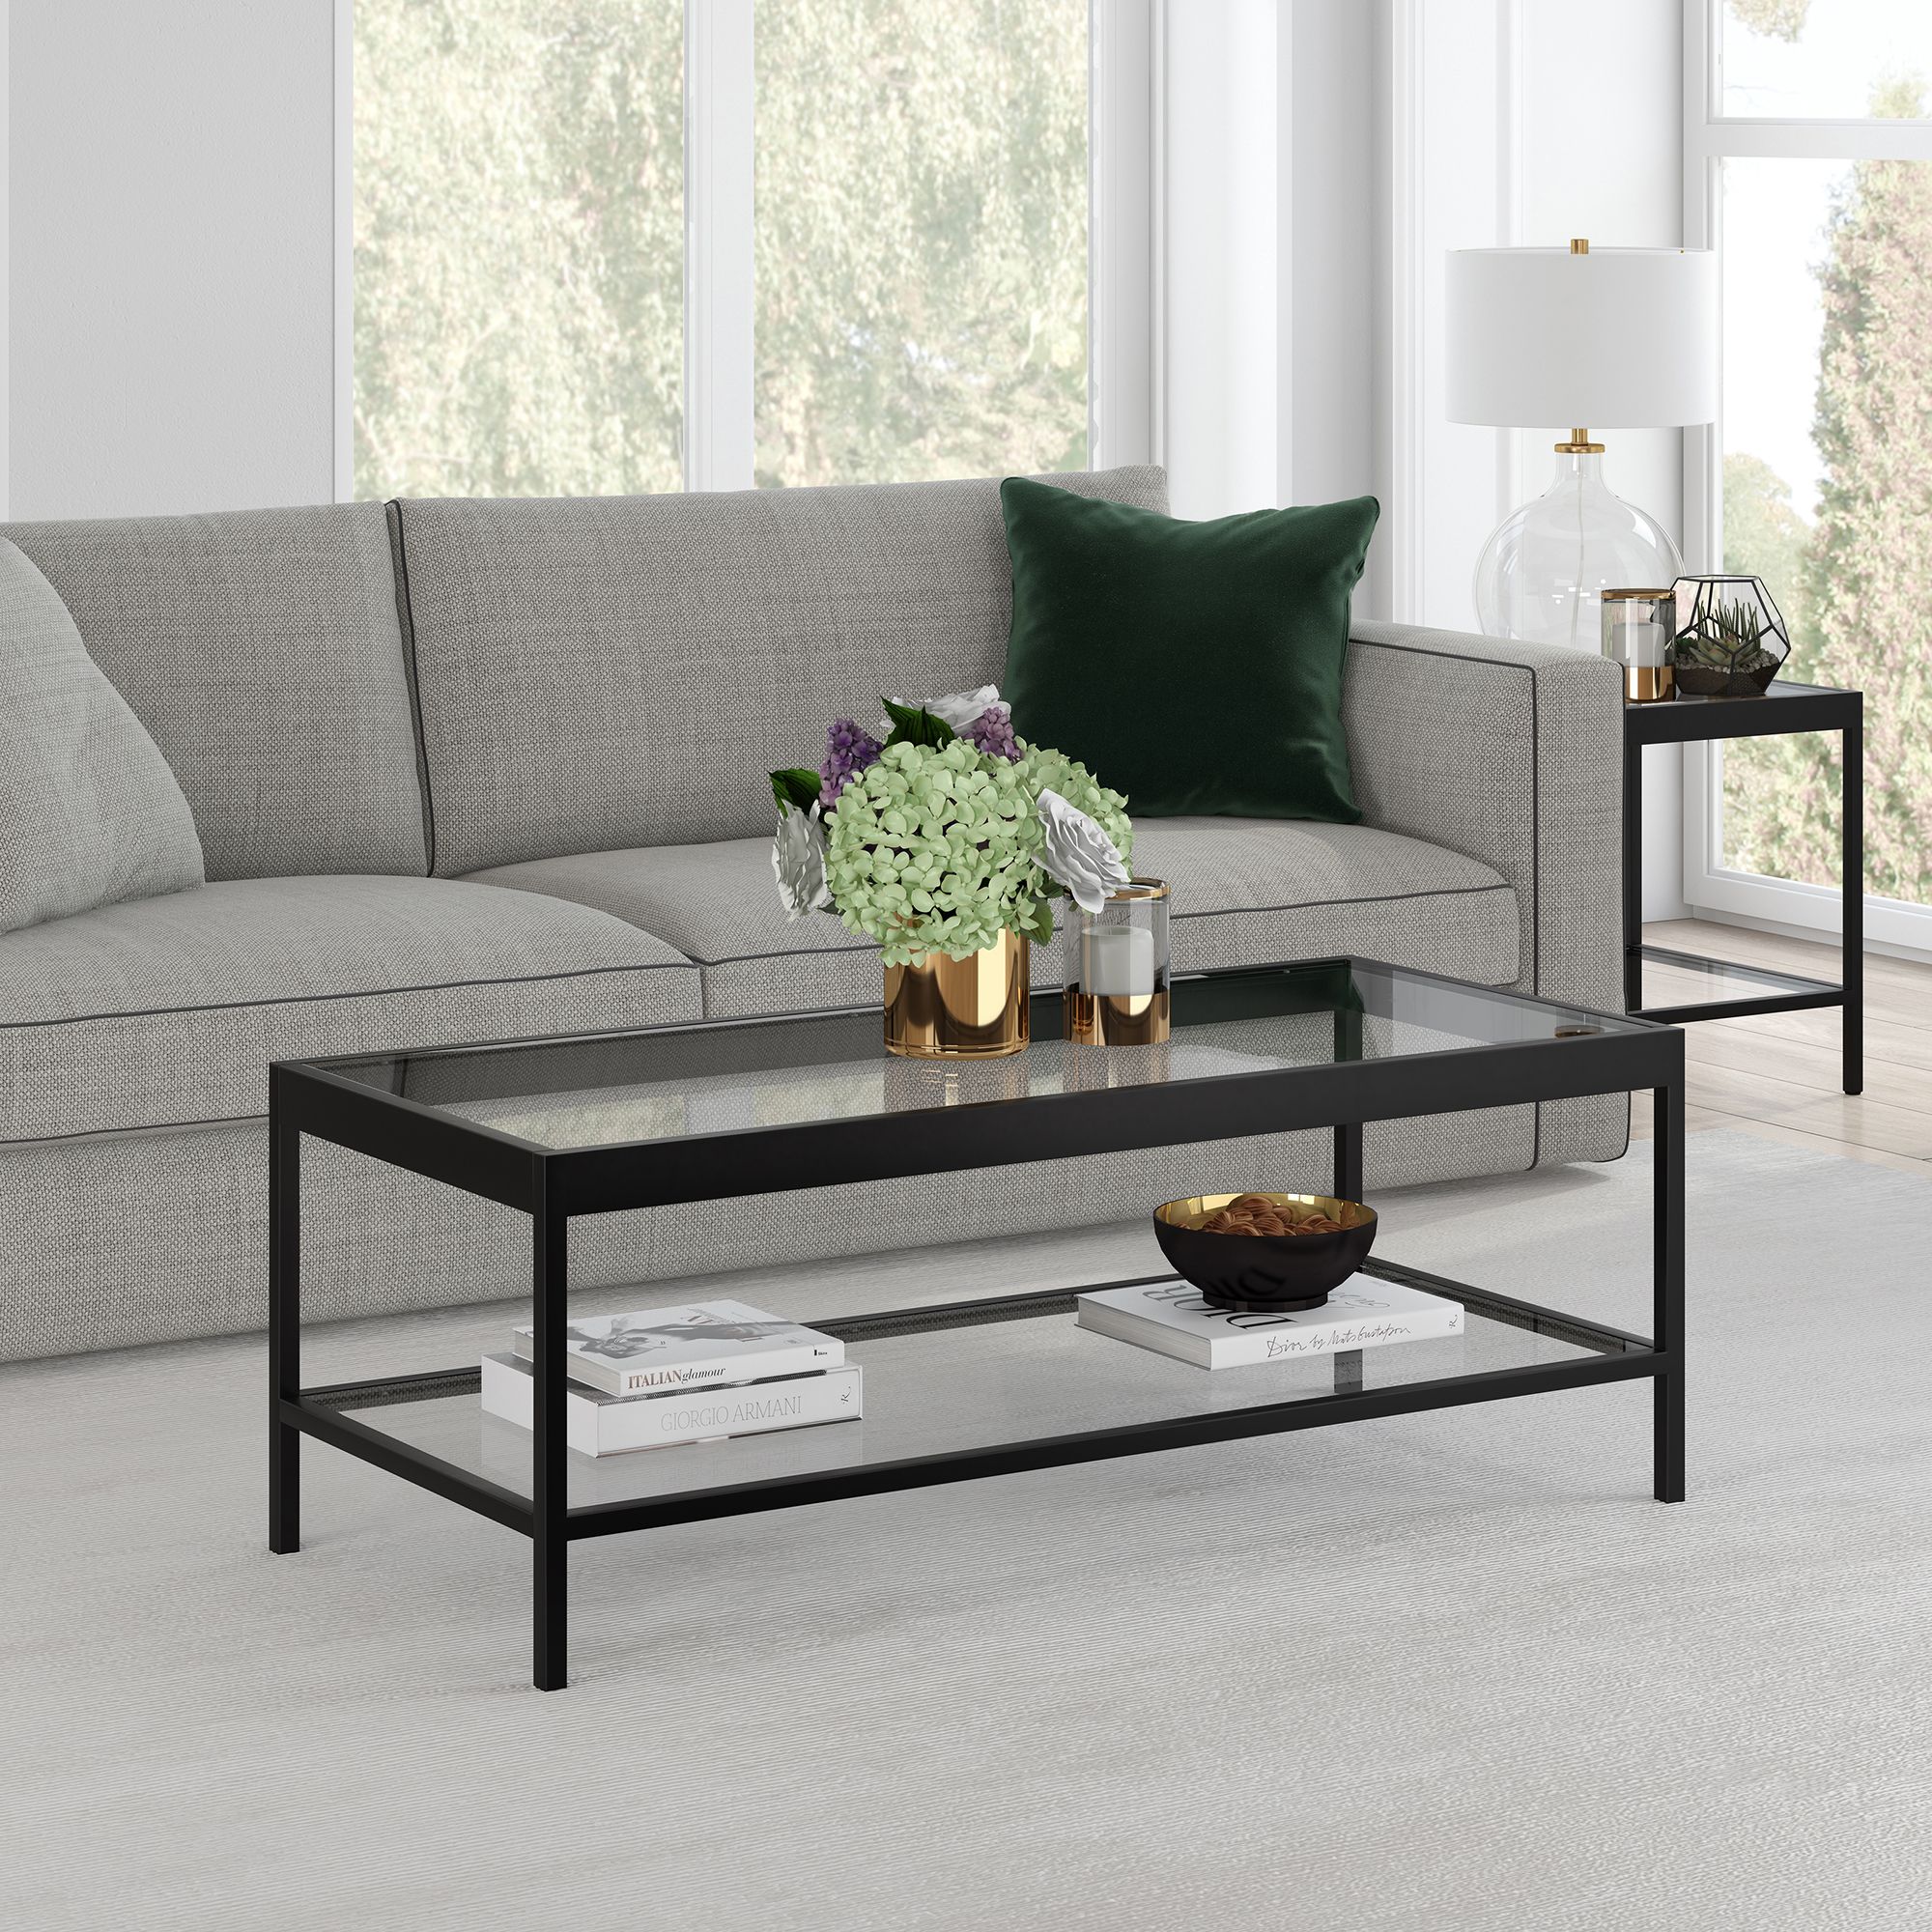 Modern Coffee Table With Open Shelf, Rectangular Table For Living Room Within Glass And Gold Rectangular Desks (View 2 of 15)